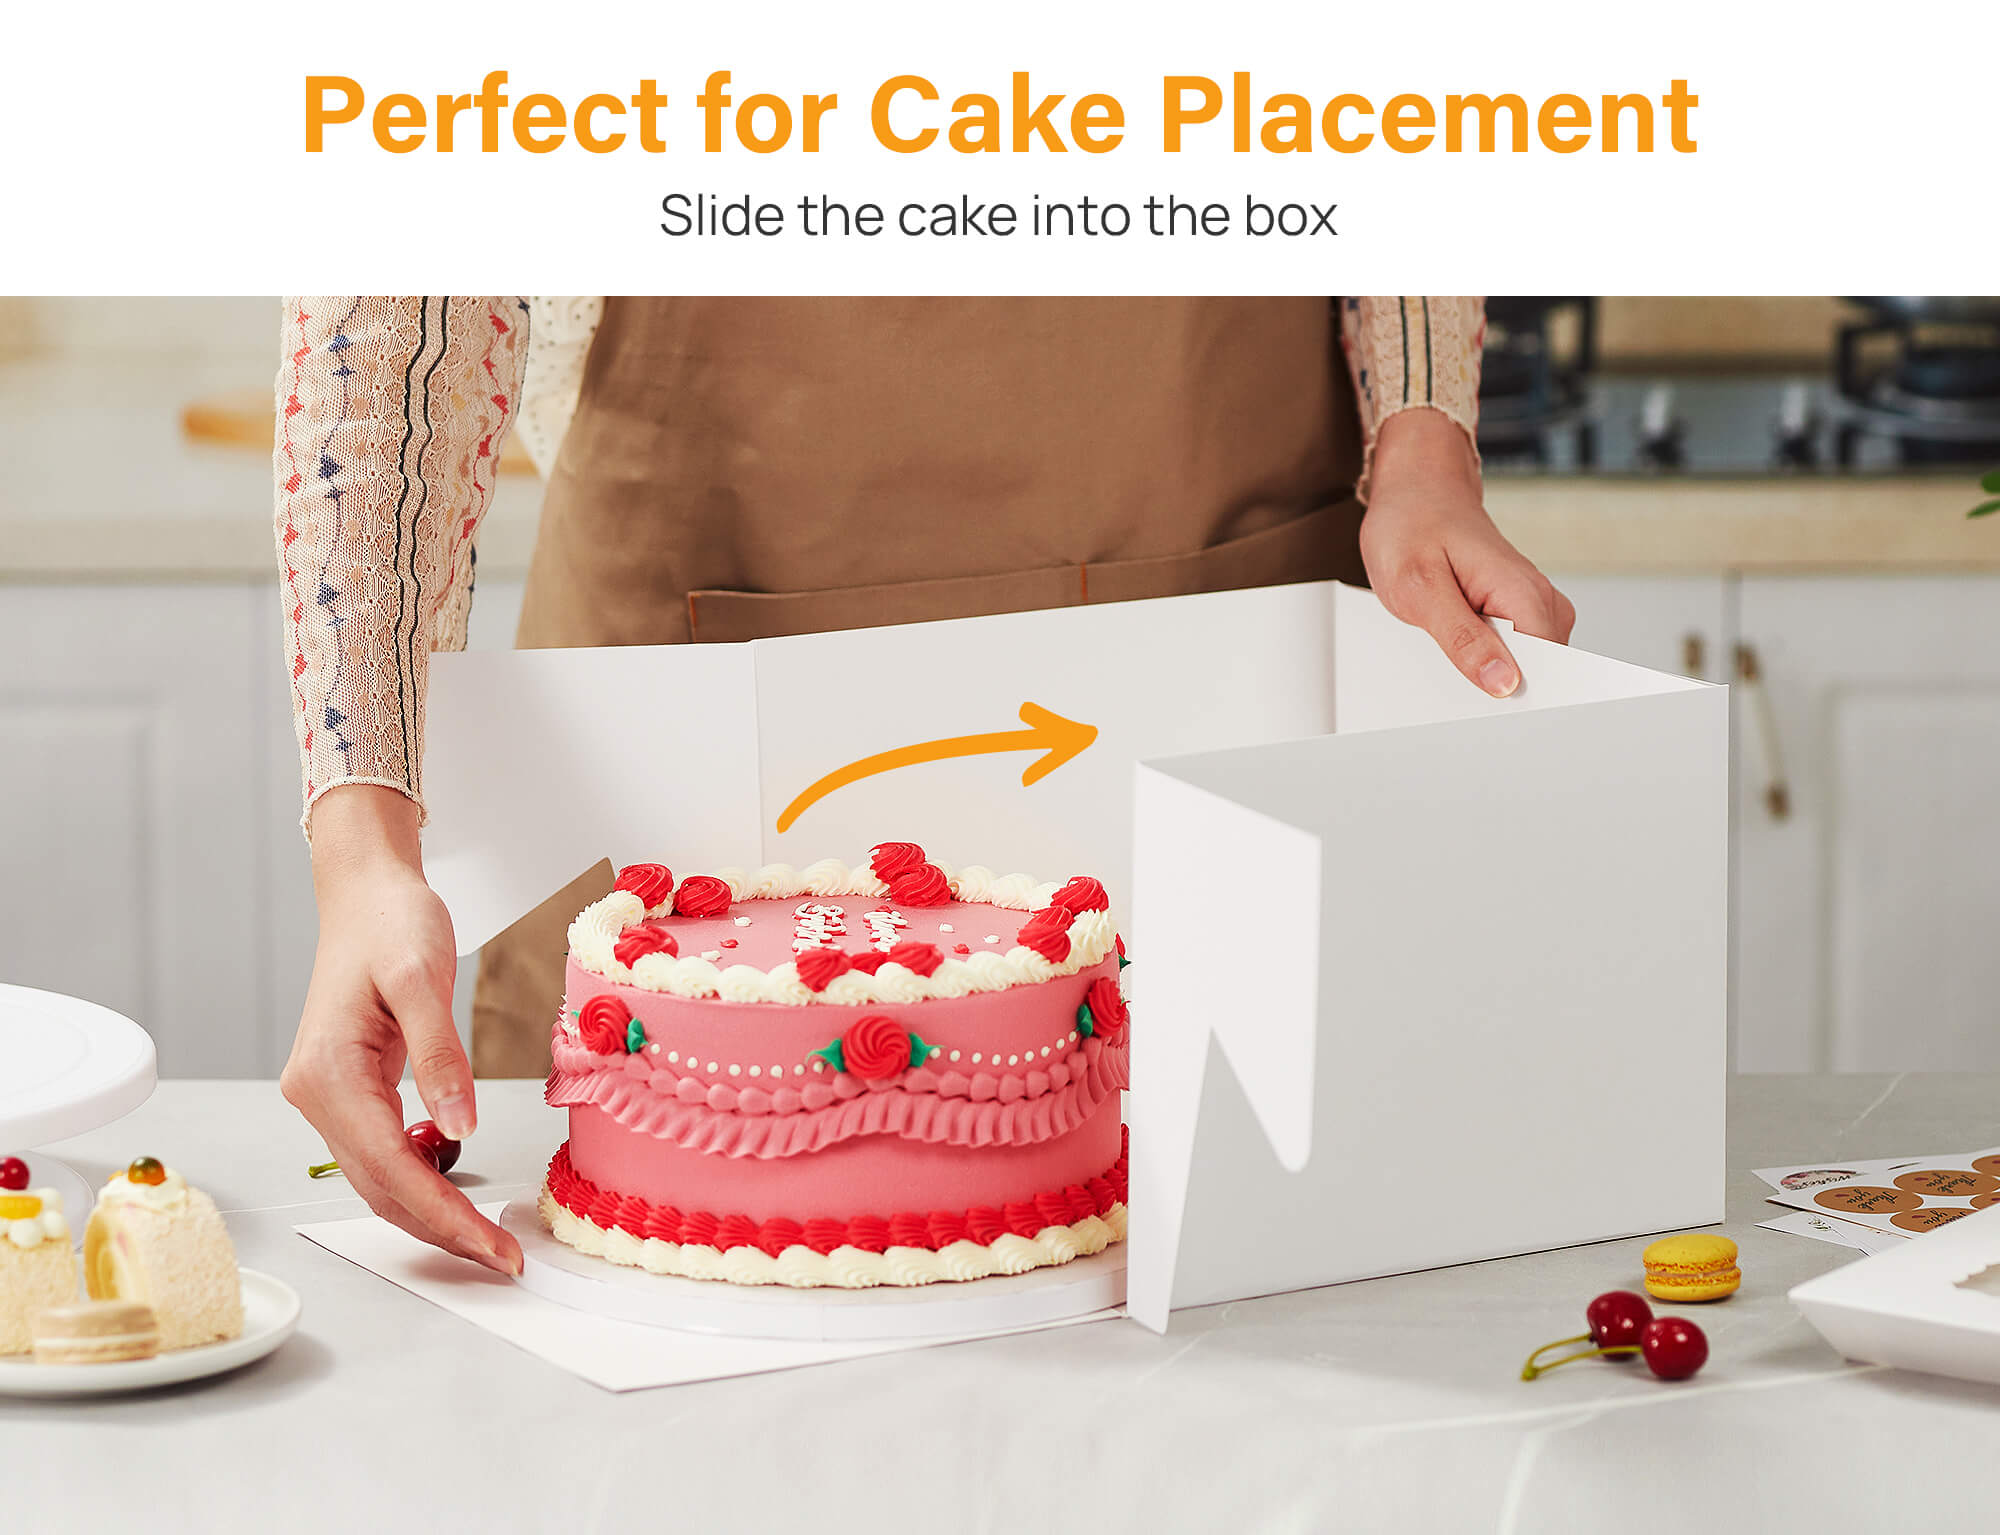 Kootek 15pcs Cake Boxes, 10x10x8 Inches Tall Cake Box with Window, White Bakery Boxes, Large Baking Boxes, Square Cardboard Cake Box for Multi-Layer Cakes, Pie, Pastries, Cake Decorating Supplies